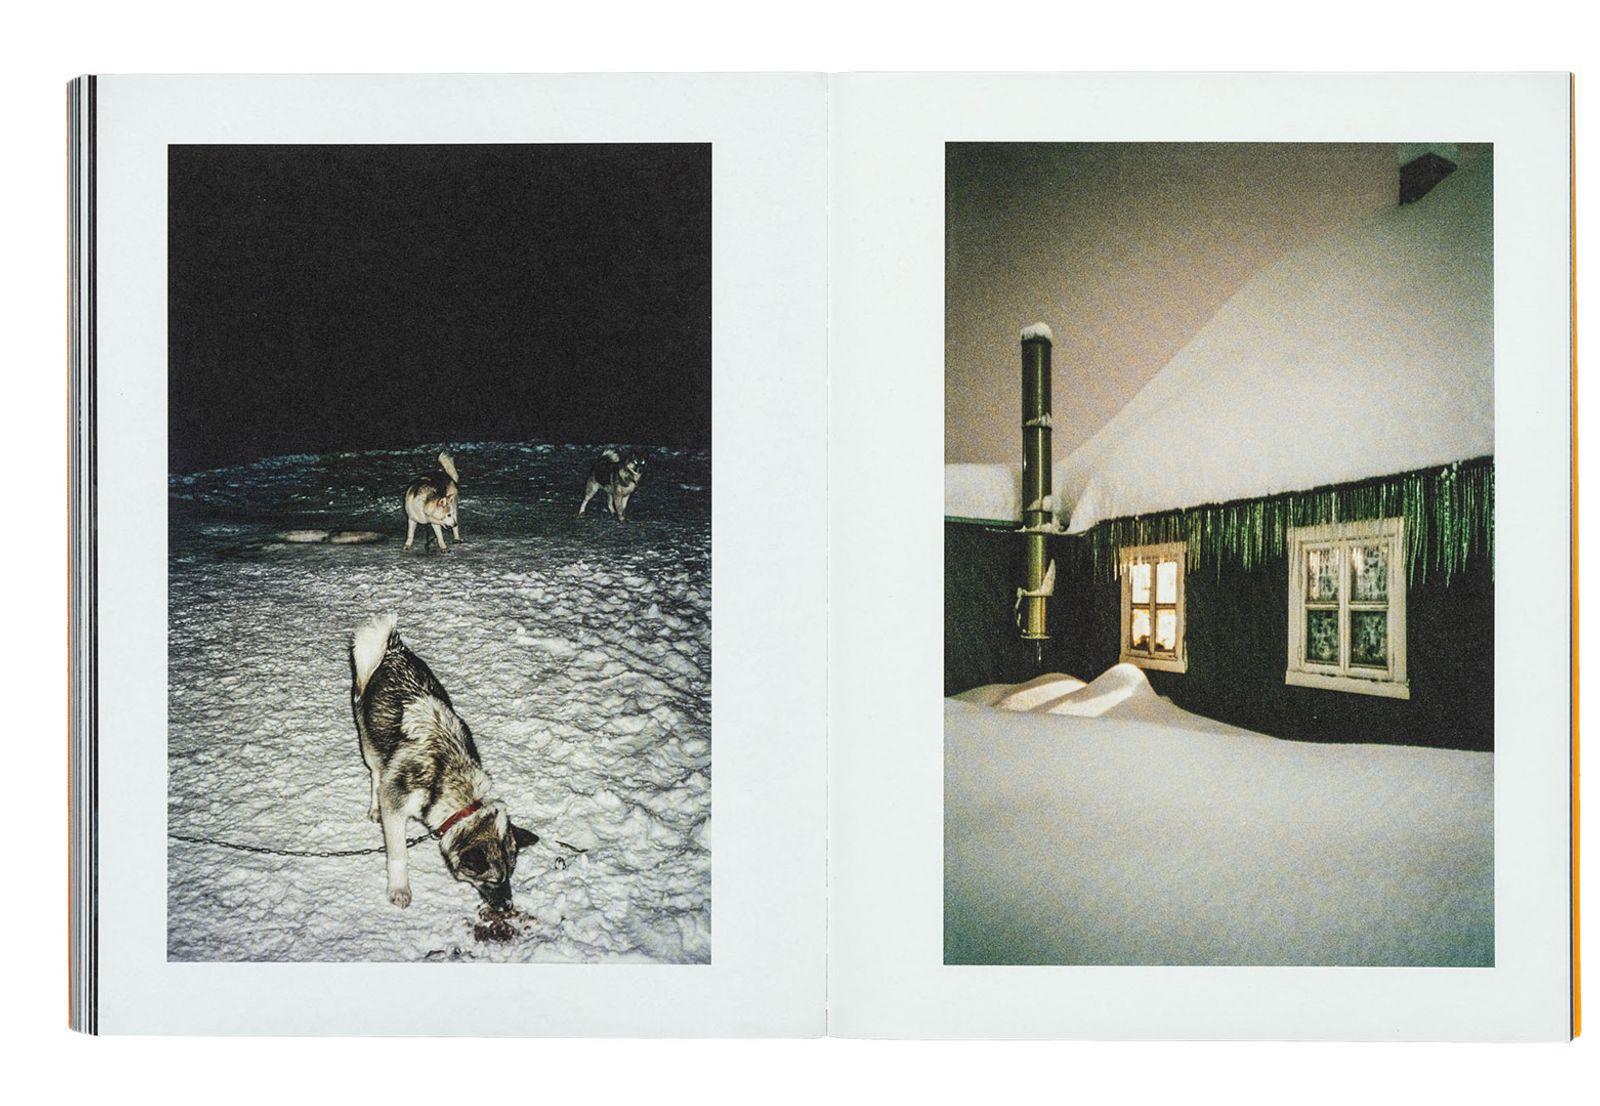 Keepers of the Ocean, Inuuteq Storch's Photobook On Life In Greenland